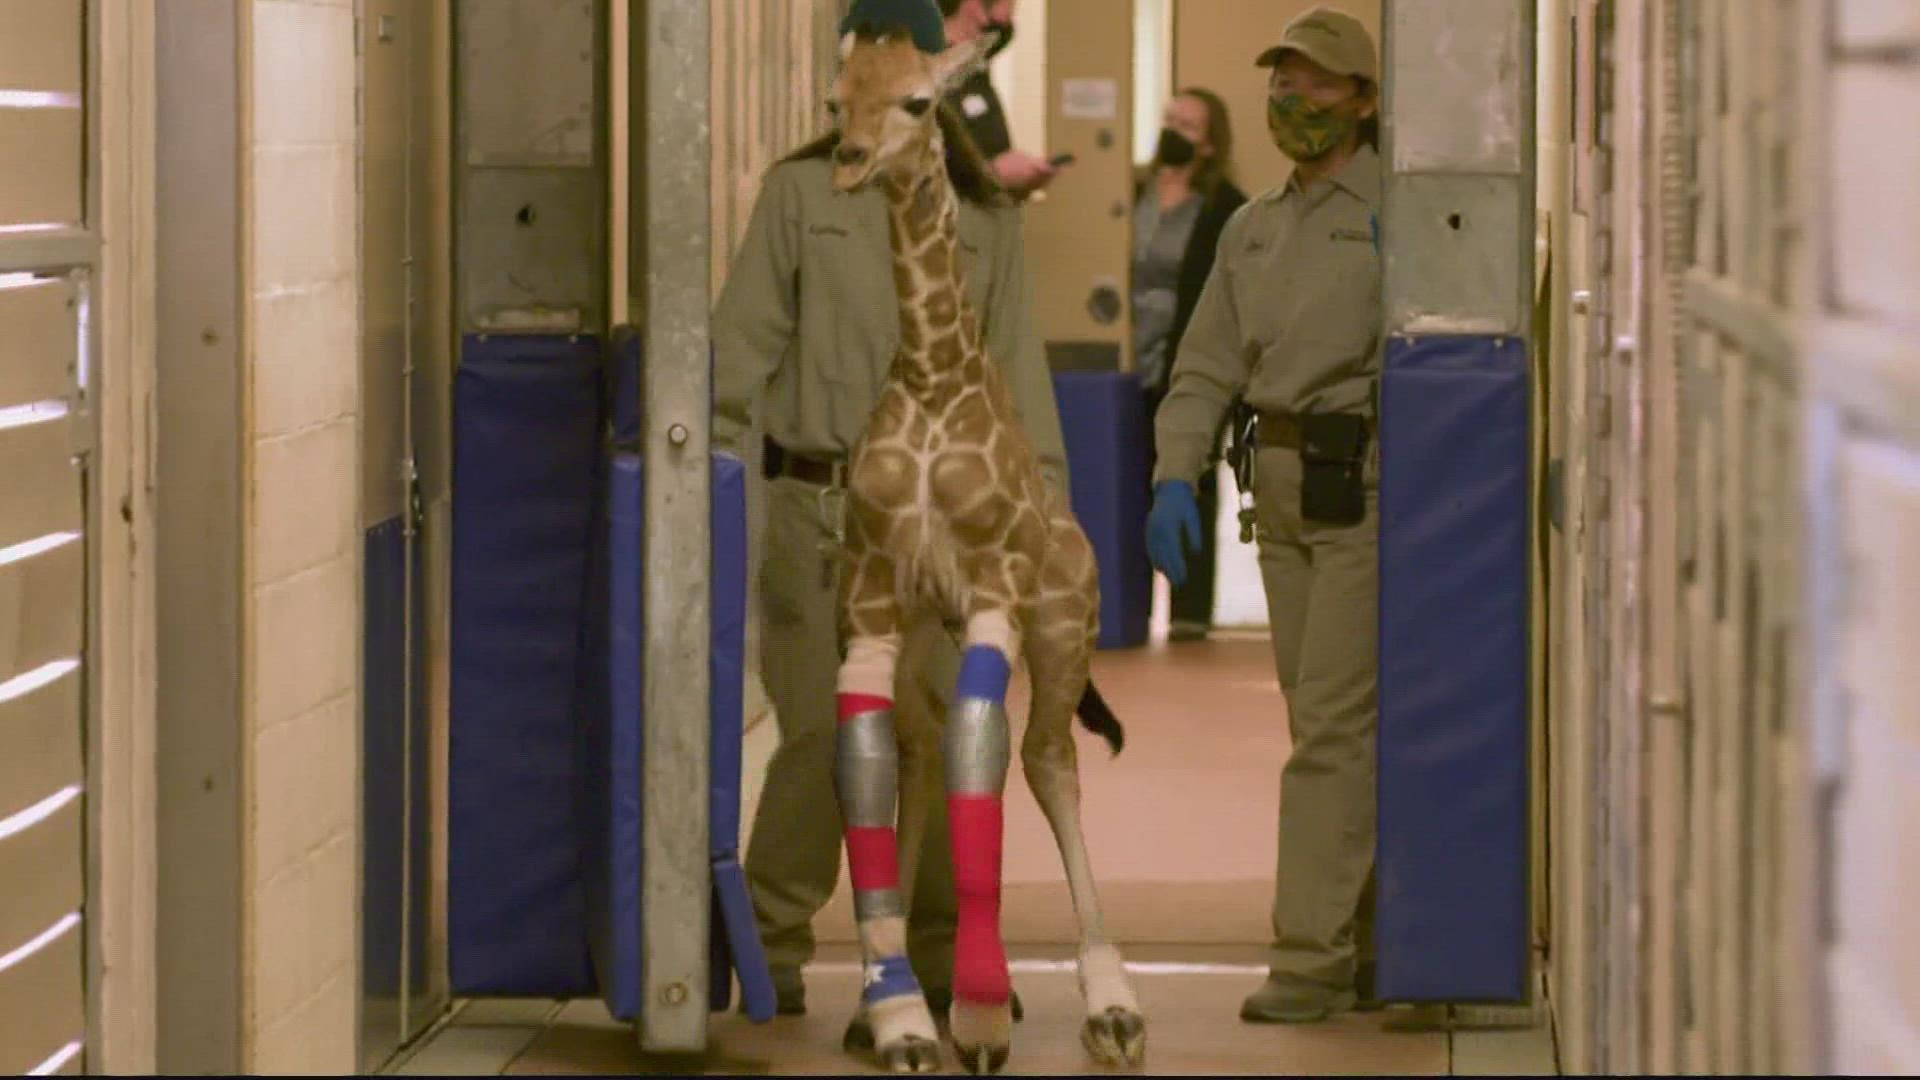 The giraffe was born with a rare condition causing its legs to bend the wrong way.